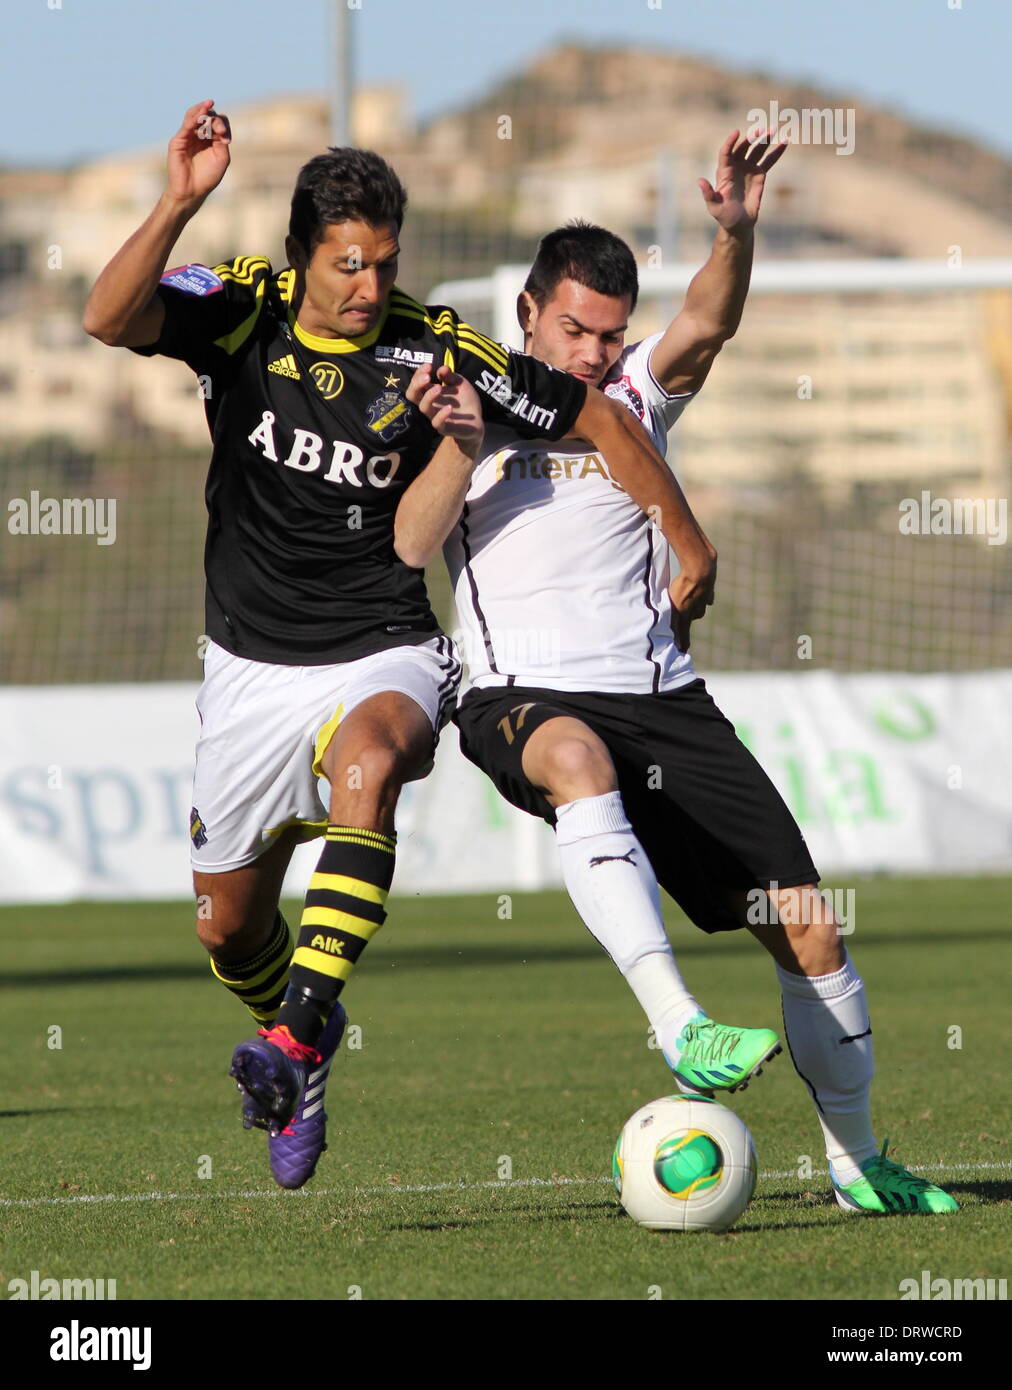 Copa Del Sol, La Manga Club, Spain. 2nd Feb 2014.  FC Astra (Romania) versus AIK (Sweden)  Luarentia Iorga (Astra) is held off by Celso Borges (AIK) during Astra's 1-0 win to maintain their winning run in the competition.  Photograph by Tony Henshaw Stock Photo